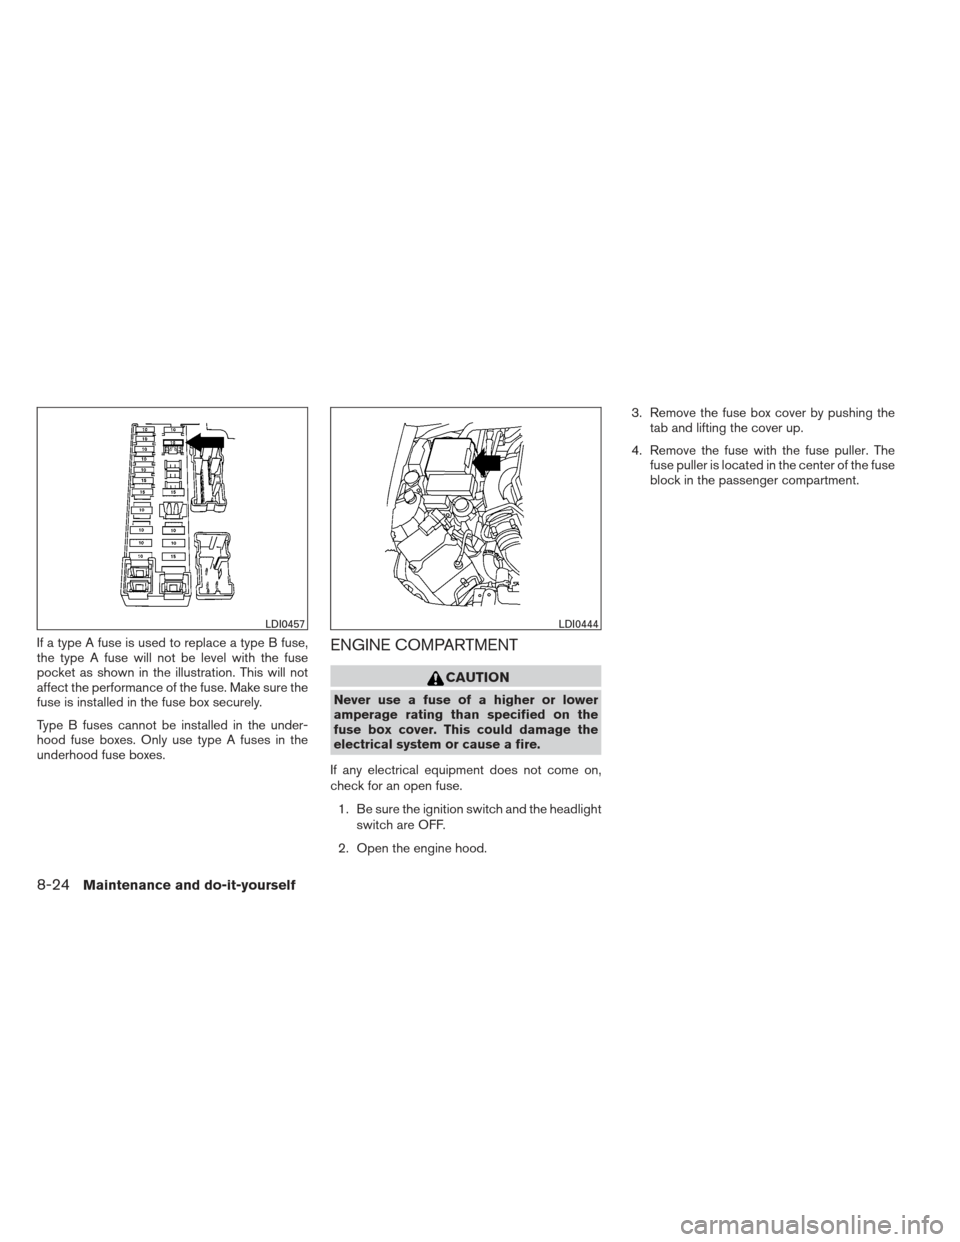 NISSAN XTERRA 2013 N50 / 2.G Owners Manual If a type A fuse is used to replace a type B fuse,
the type A fuse will not be level with the fuse
pocket as shown in the illustration. This will not
affect the performance of the fuse. Make sure the
